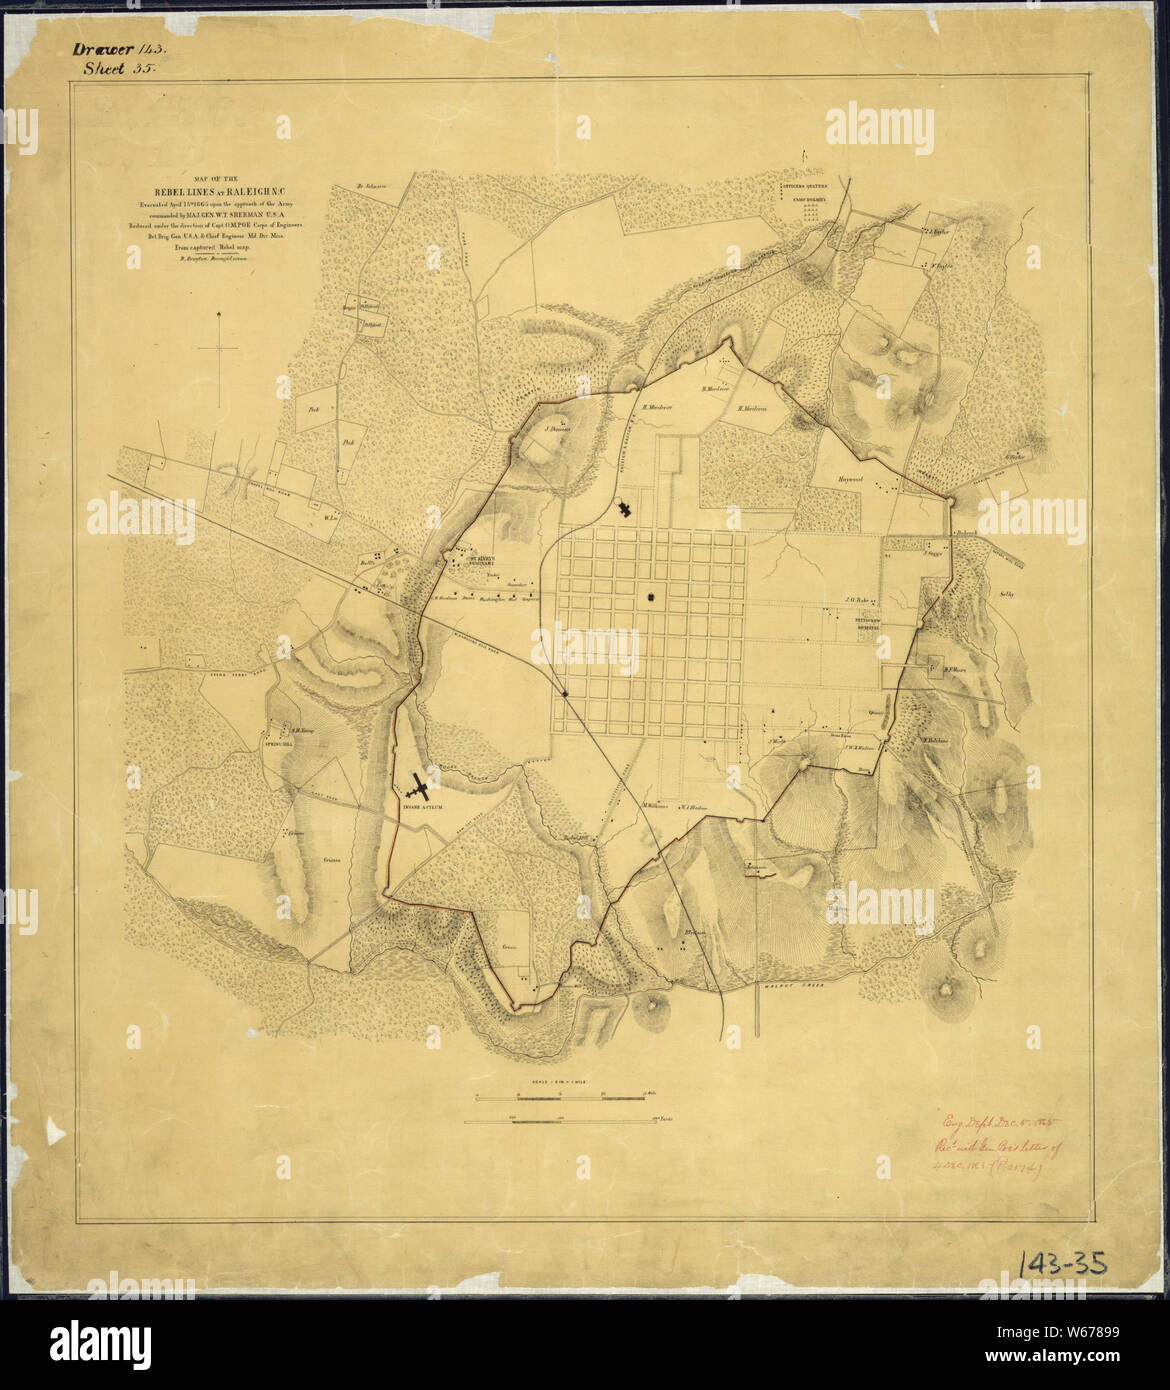 Map of the Rebel Lines at Raleigh, N.C., Evacuated April 13th, 1865, upon the approach of the Army commanded by Maj. Gen. W. T. Sherman, U.S.A. Reduced under the direction of Capt. O. M. Poe, Corps of Engineers, Bvt. Brig. Gen., U.S.A. & Chief Engineer, Mil. Div. Miss. From captured Rebel map. B. Drayton, Draughtsman. Stock Photo